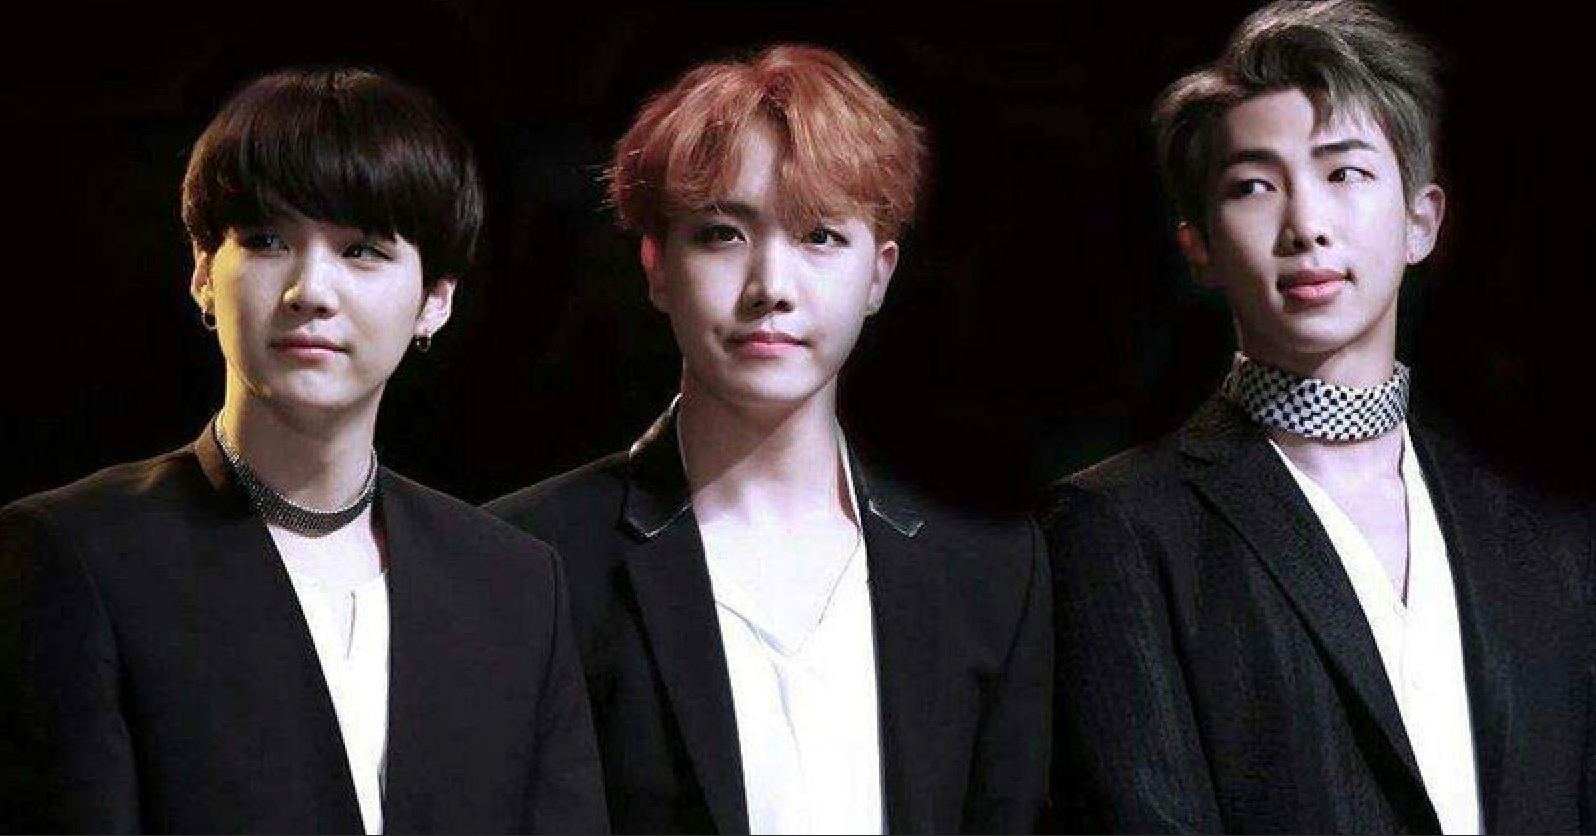 BTS RM, J-Hope, and Suga Revealed to Have Participated in Making 'My Universe'